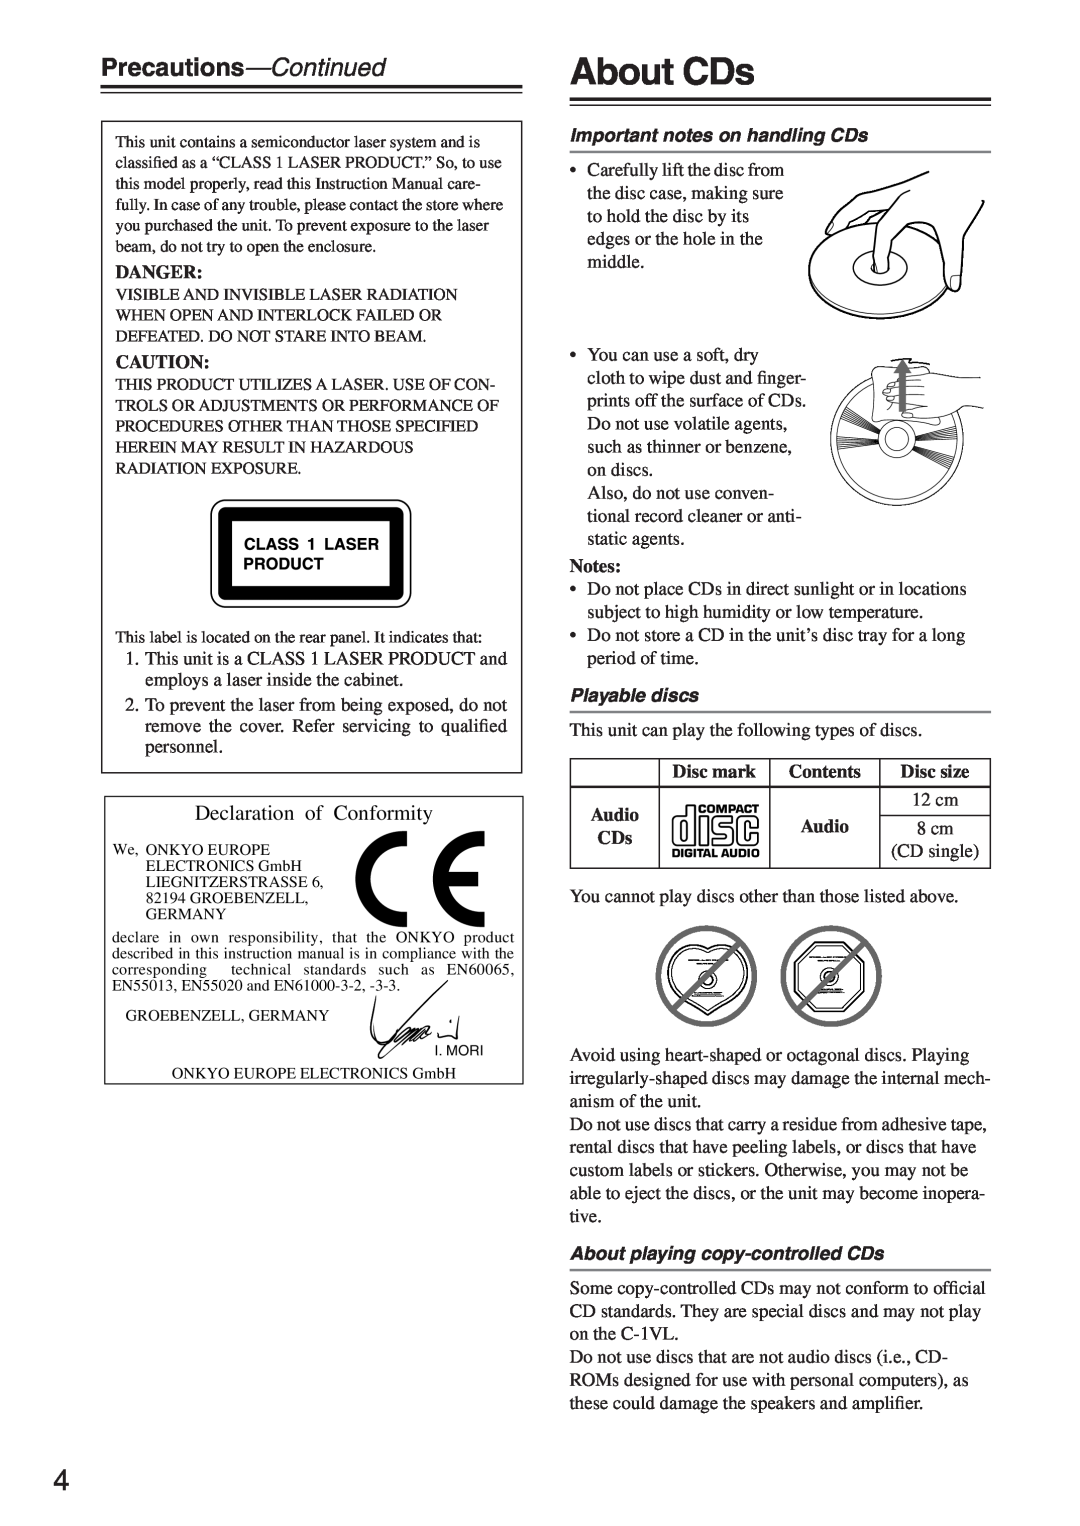 Onkyo C-1VL About CDs, Precautions-Continued, Declaration of Conformity, Danger, Important notes on handling CDs, Contents 